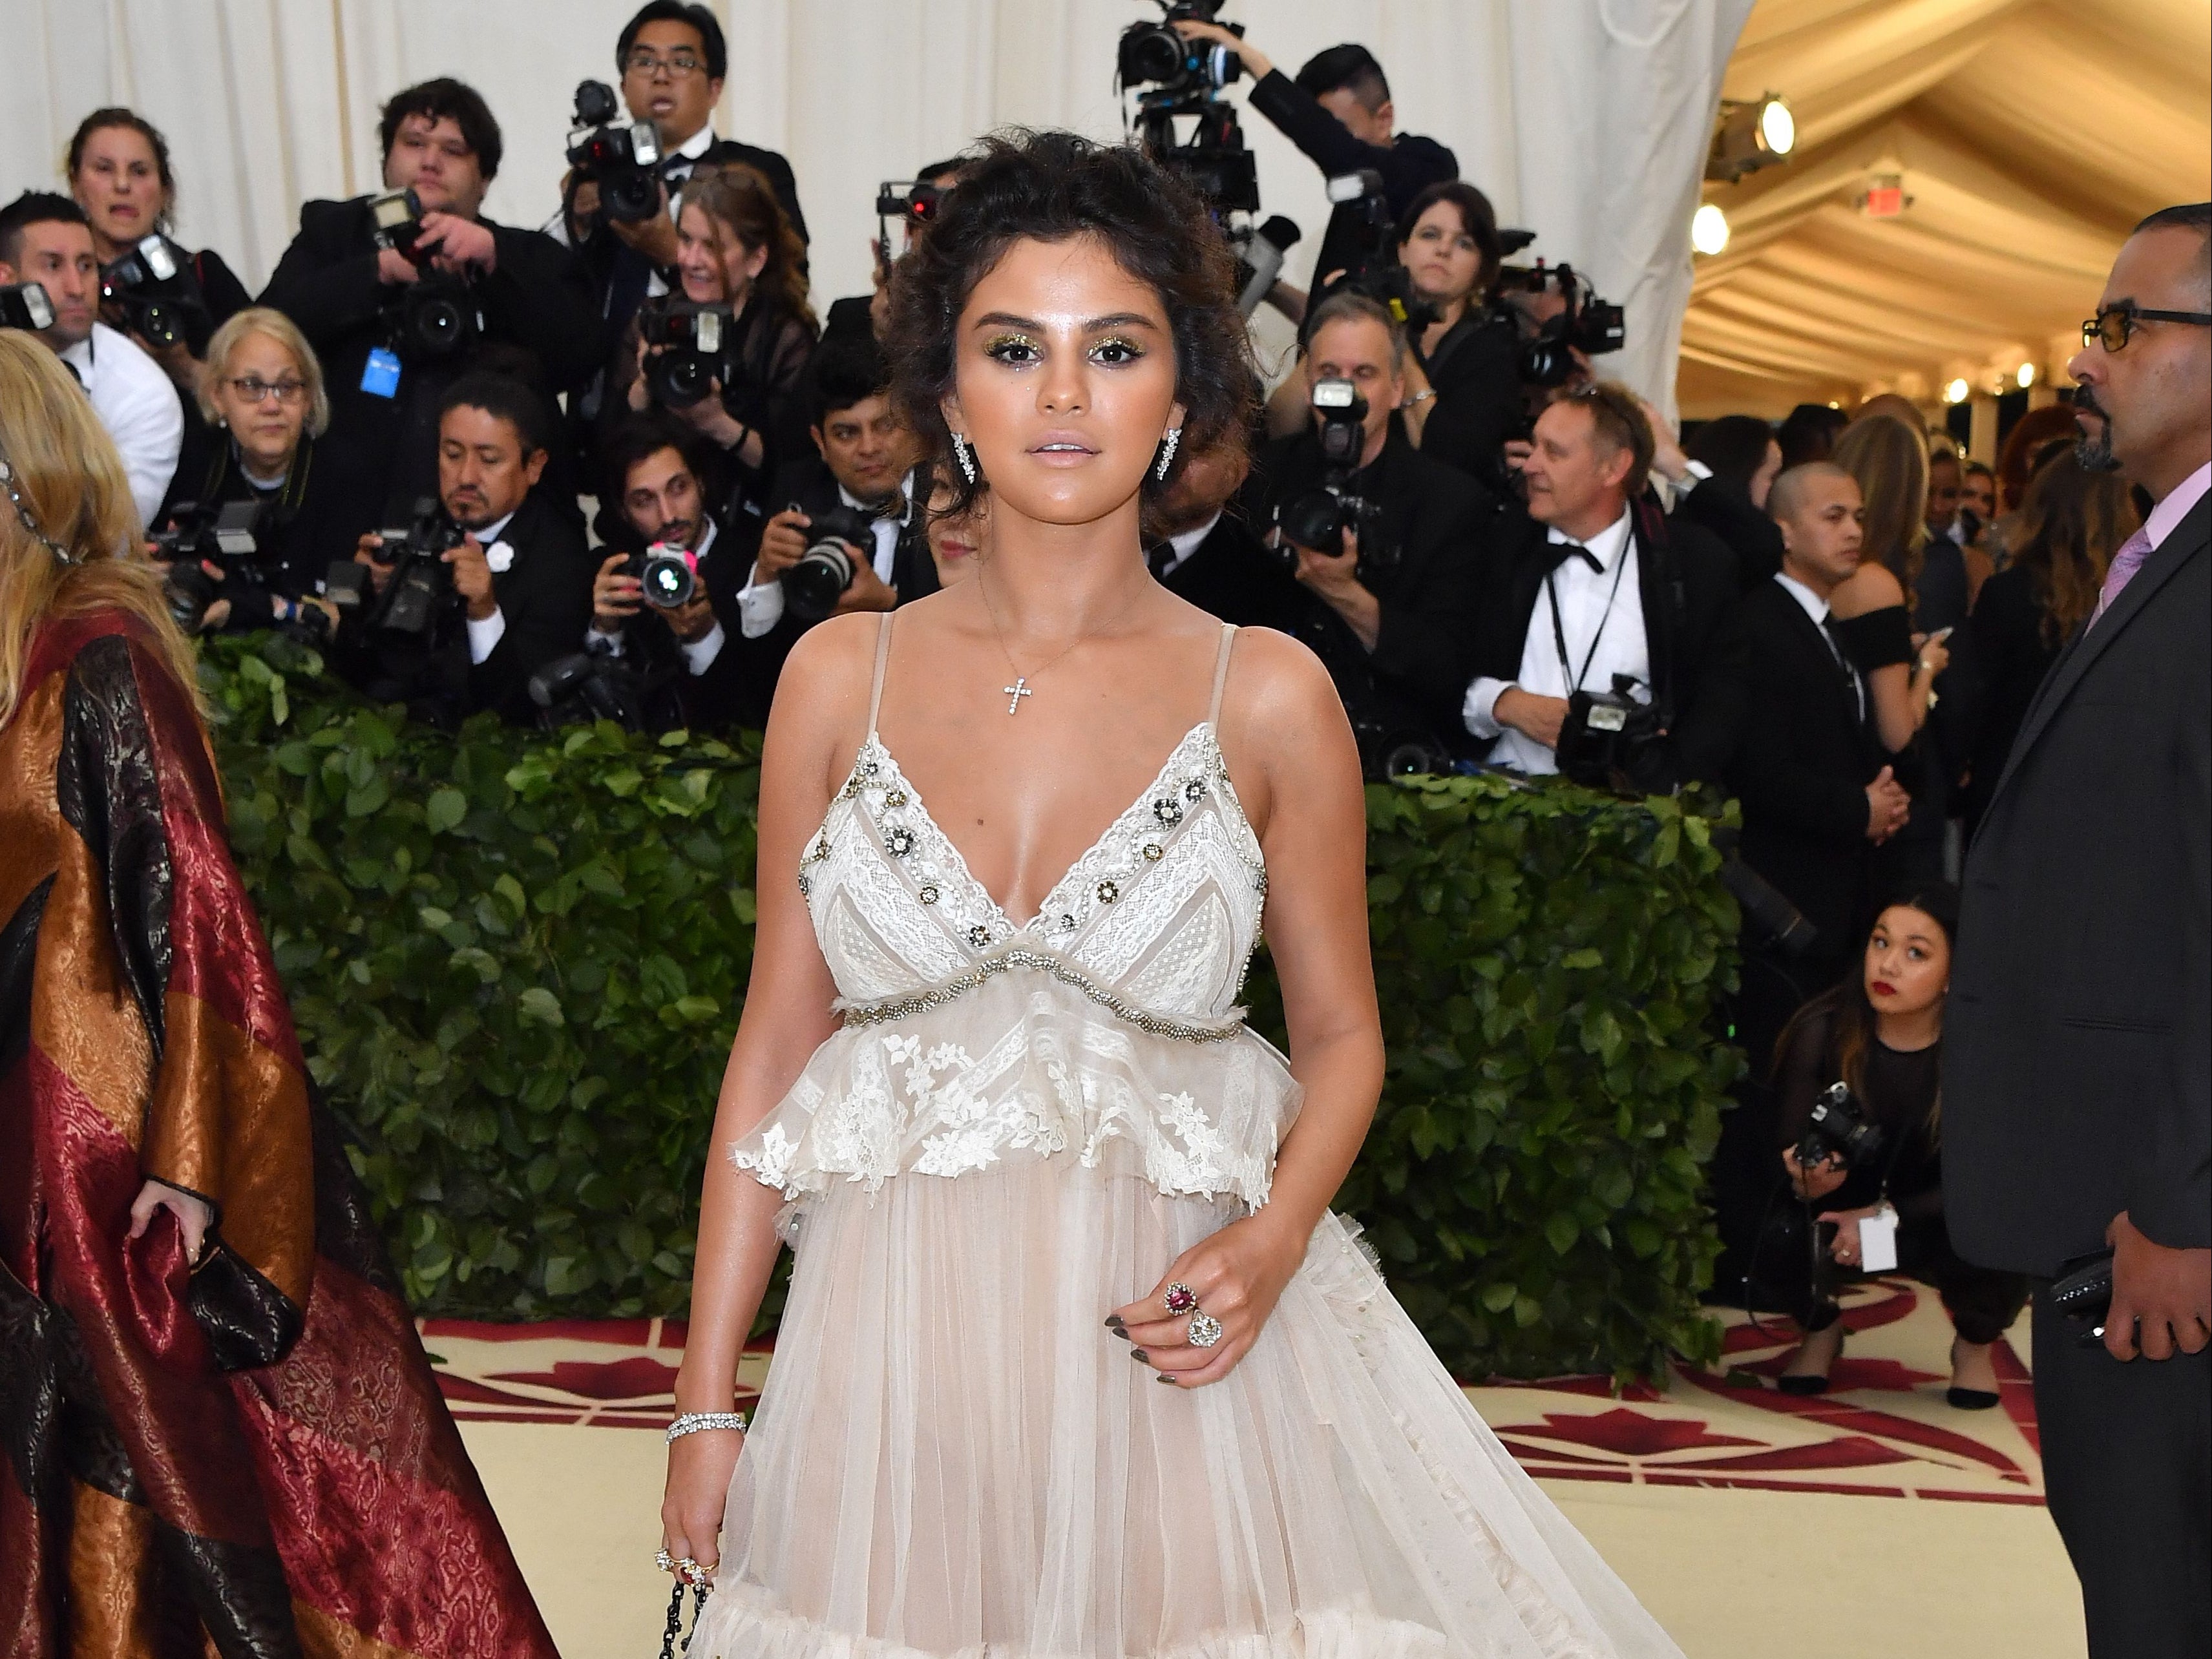 Selena Gomez reflects on tanning mishap at 2018 Met Gala